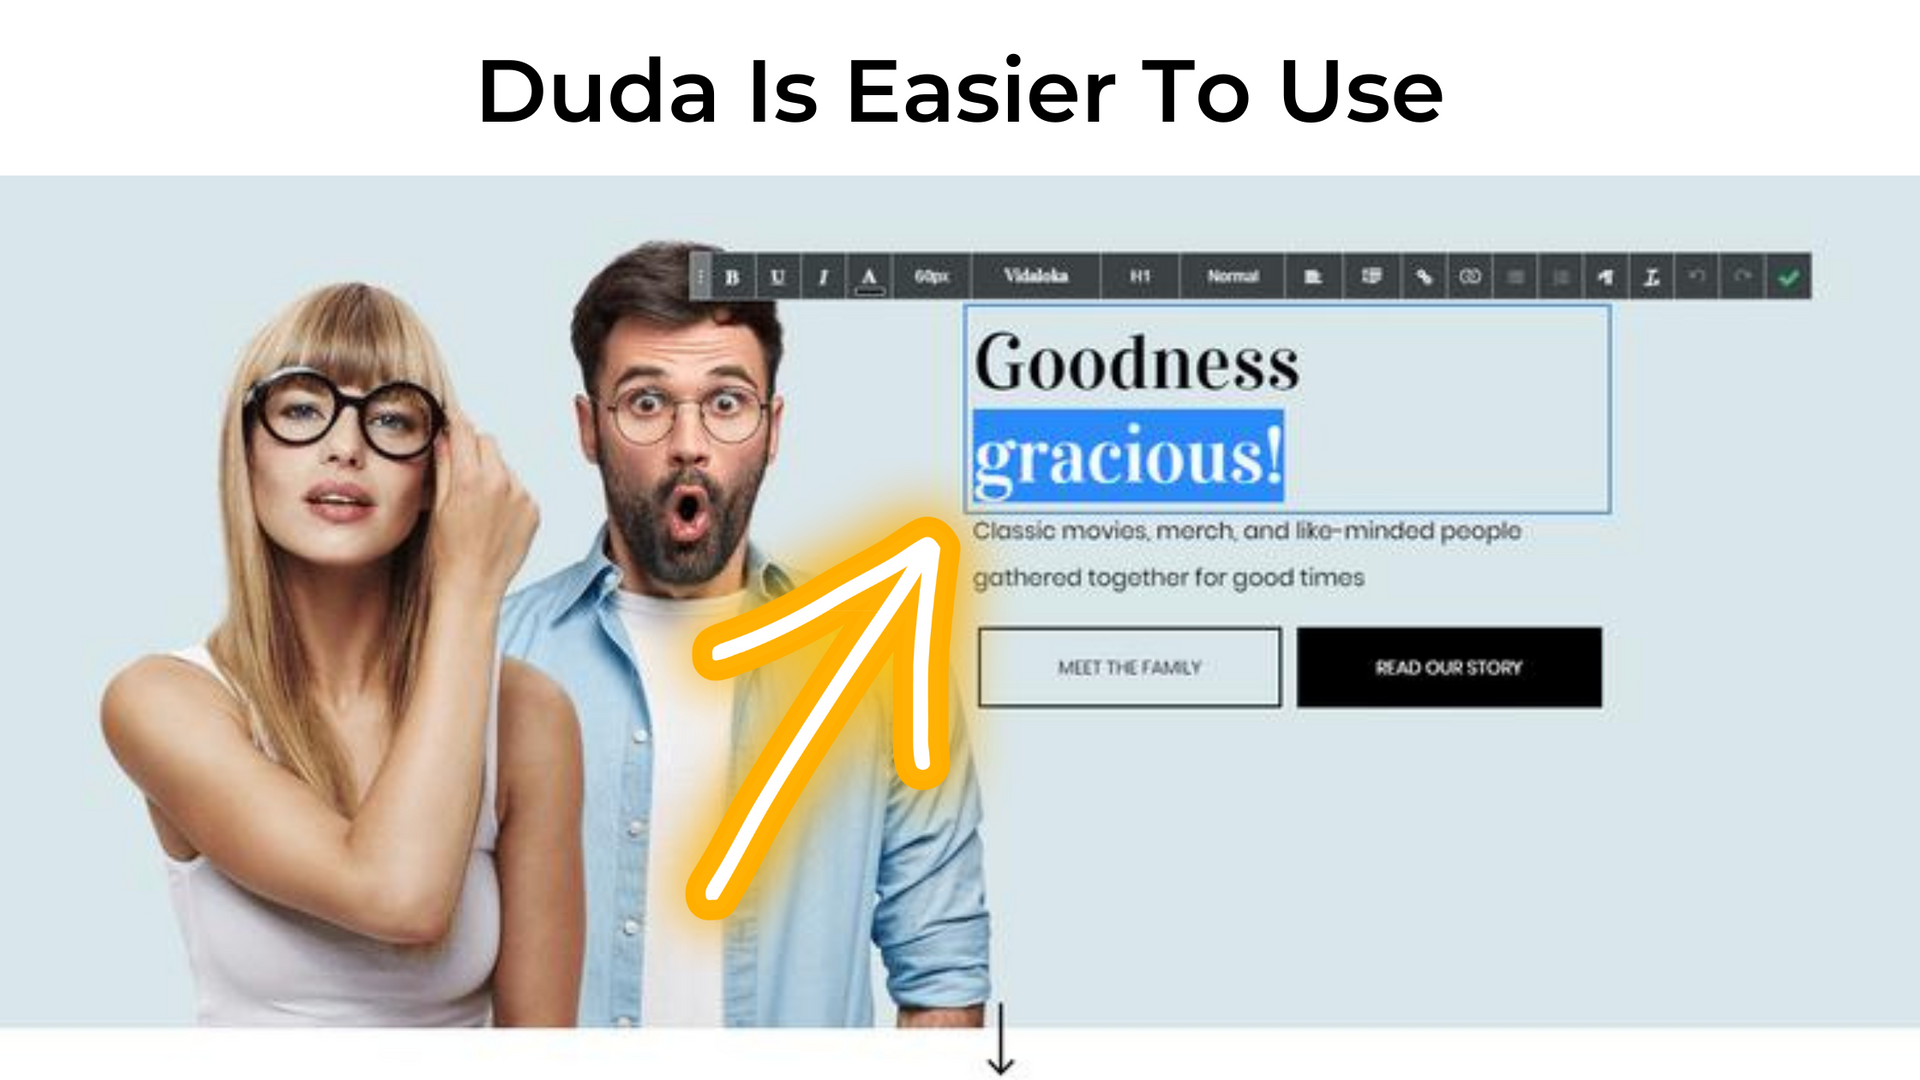 Duda Is Easier To Use